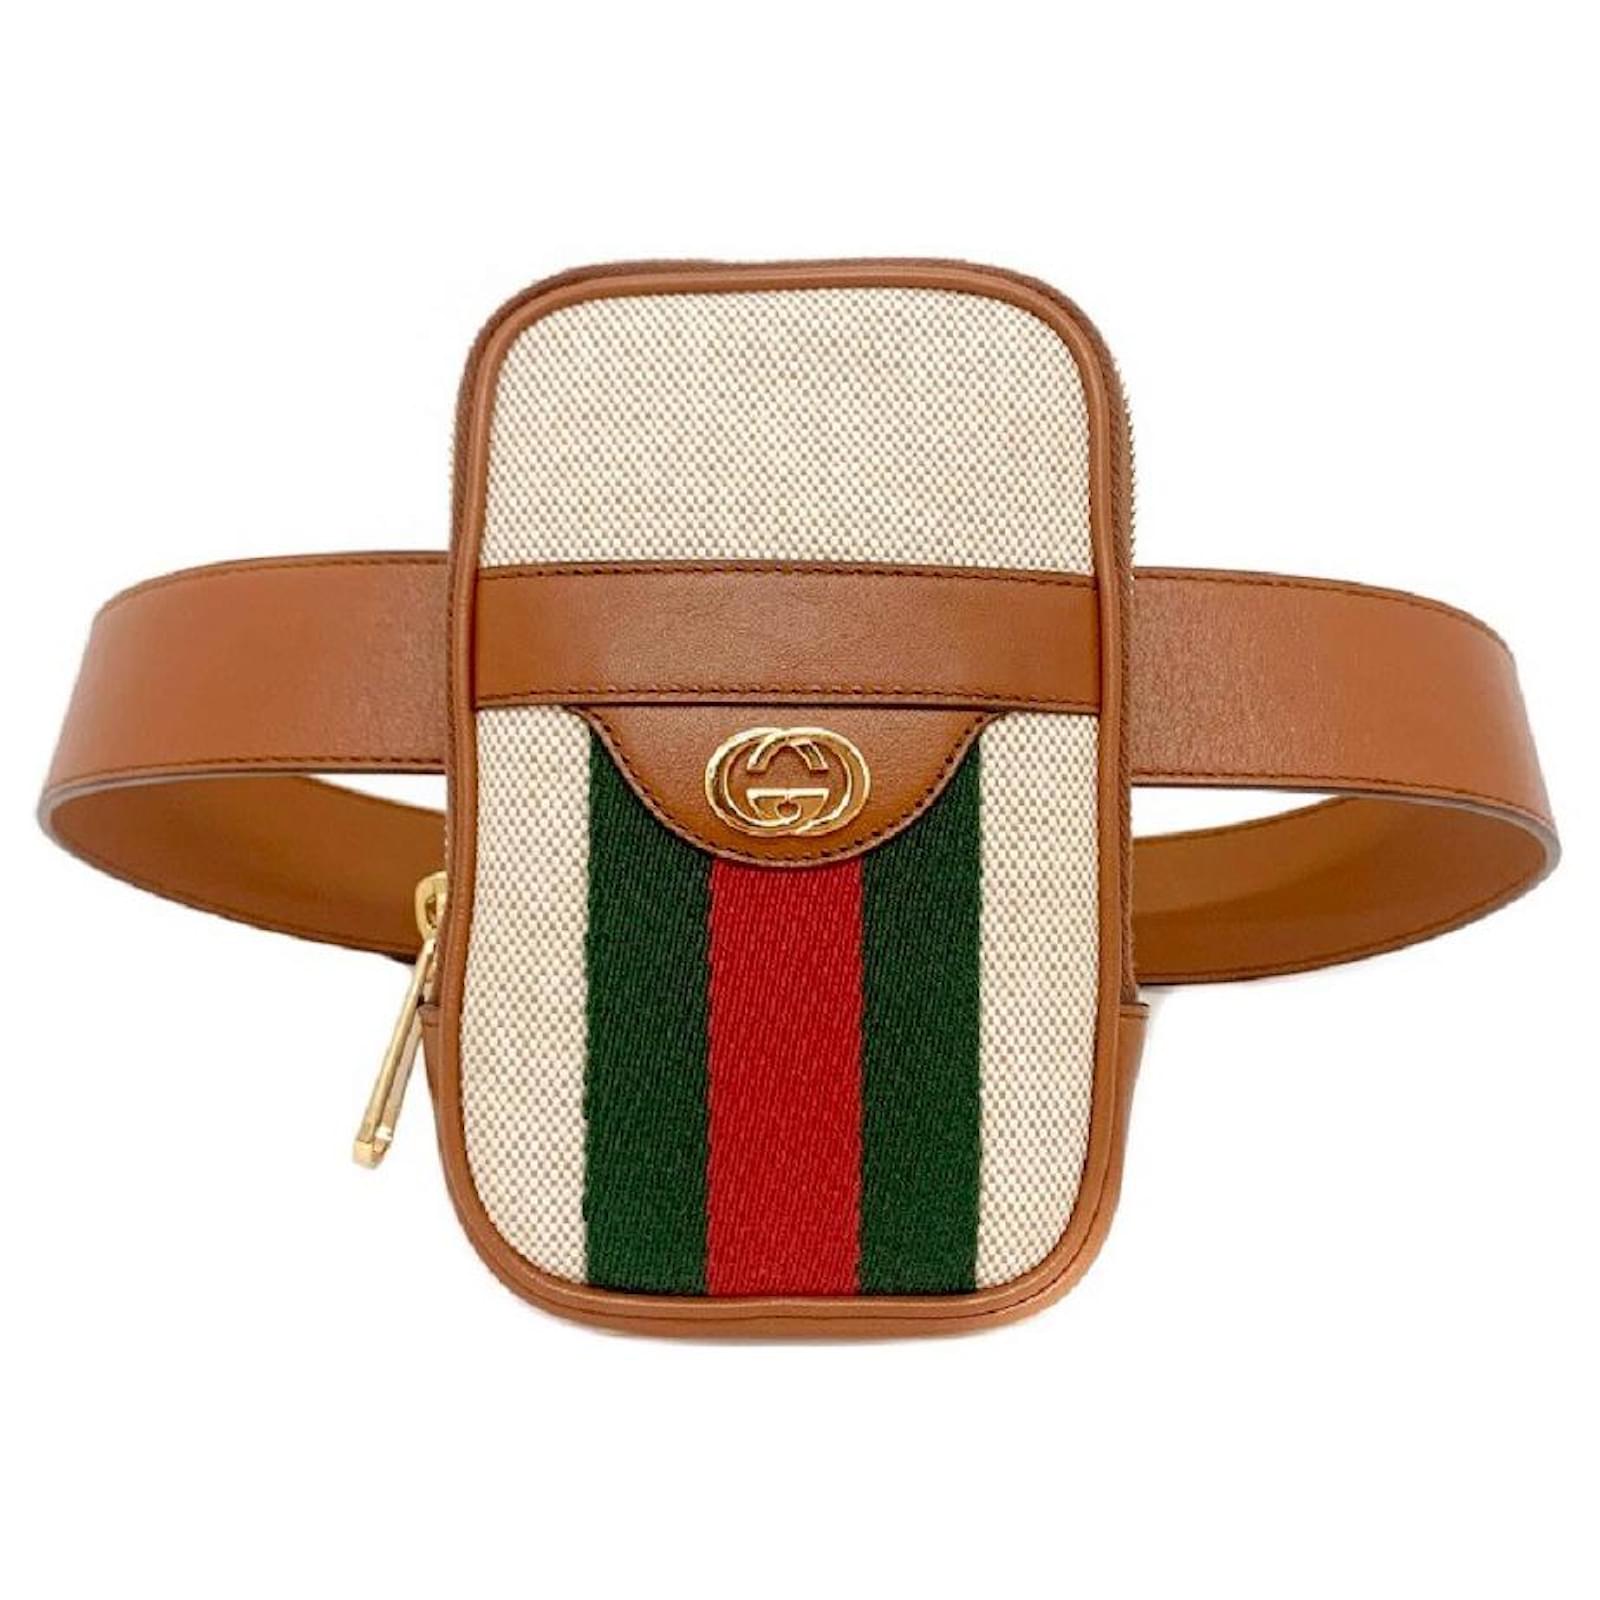 Used] Gucci belt bag brown beige shelly 581519 waist pouch canvas